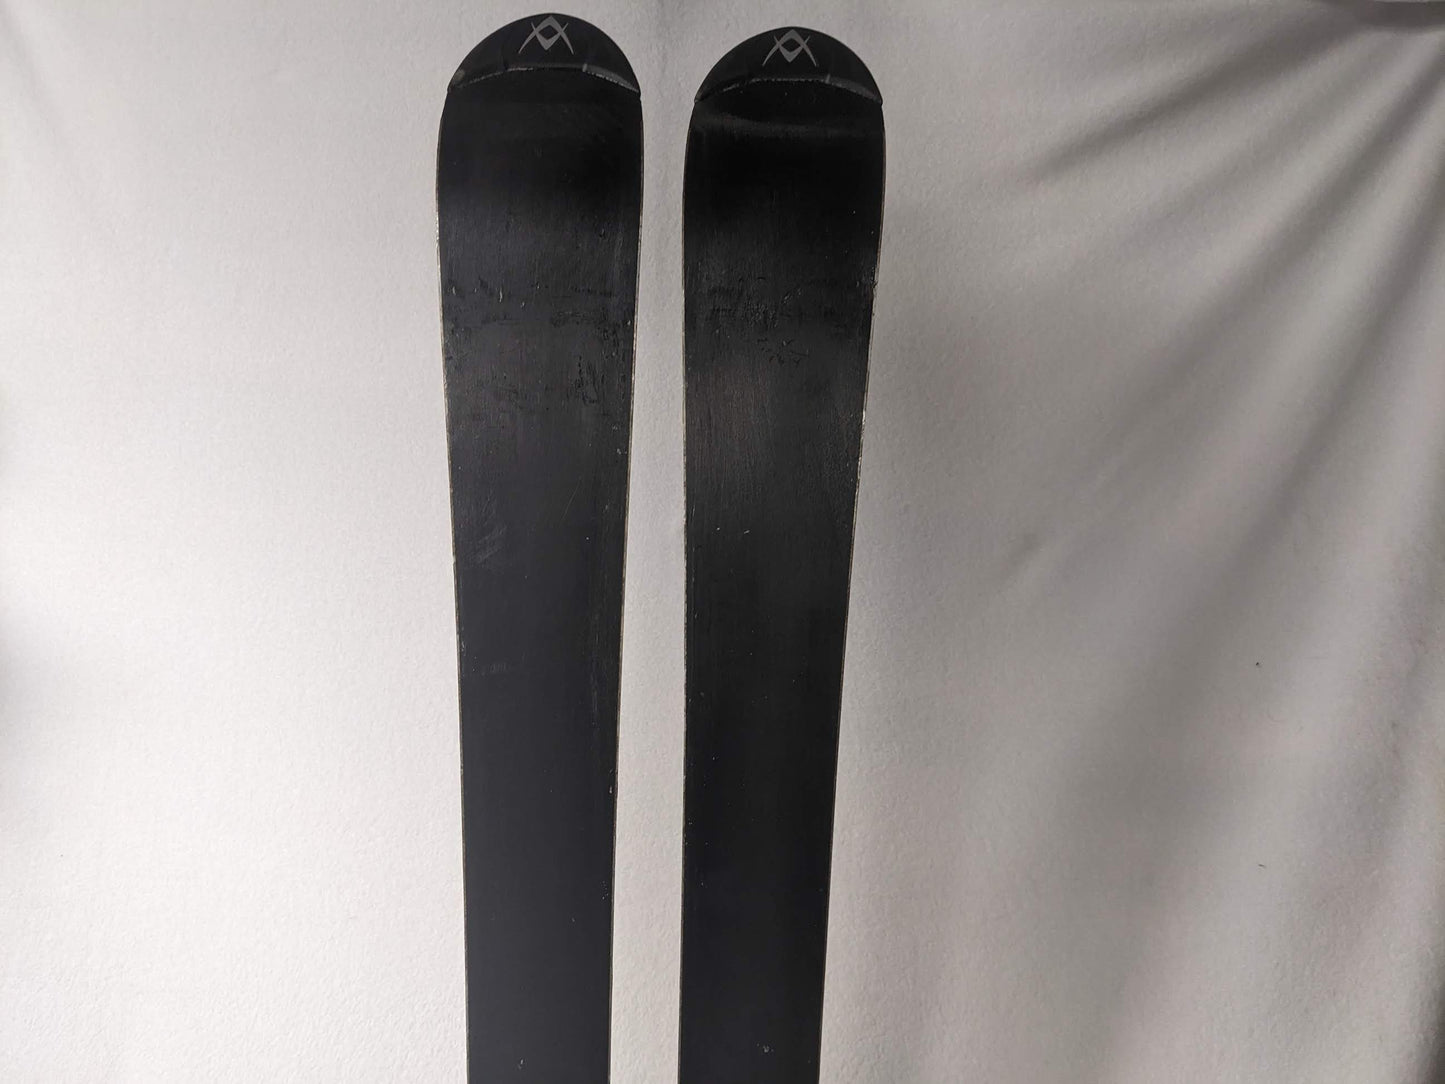 Volkl Vectris 20-20 Skis w/Marker Bindings Size 170 Cm Color Gray Condition Used